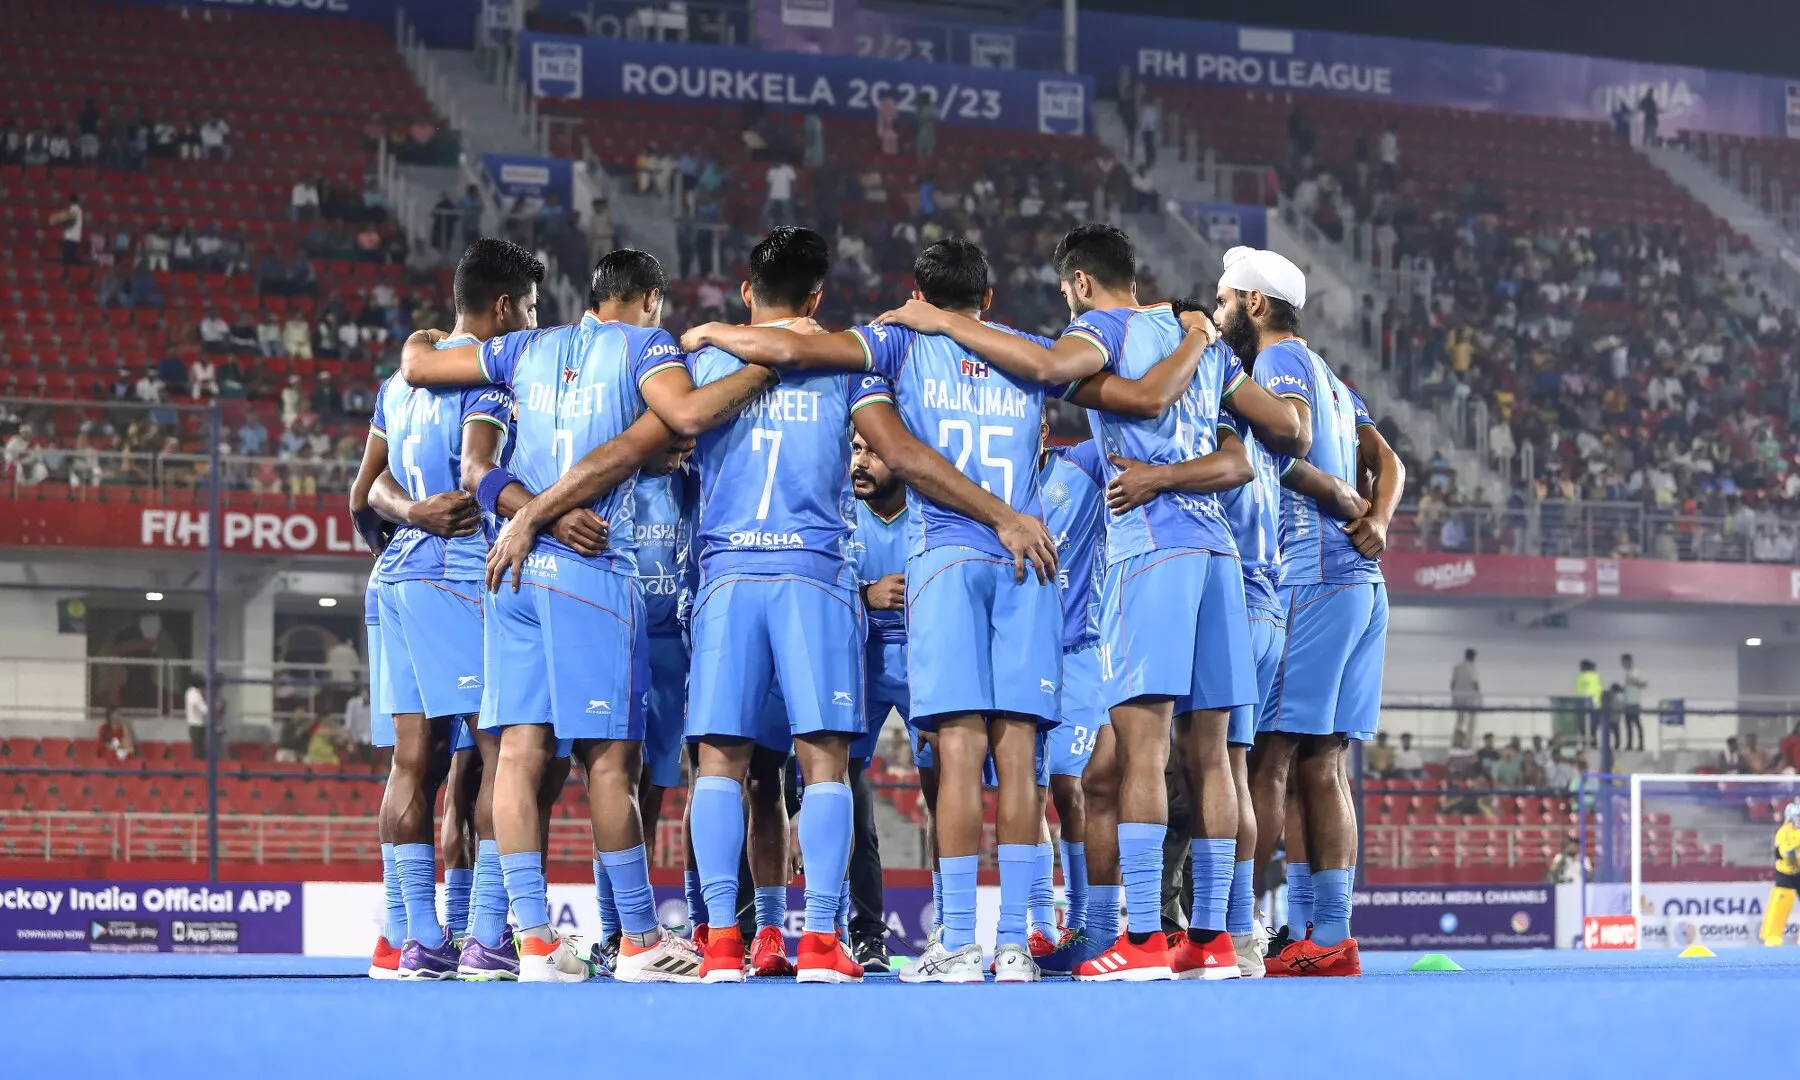 FIH Men’s Hockey Pro League 2022-23 Preview: India take on World No 1 Netherlands, Argentina